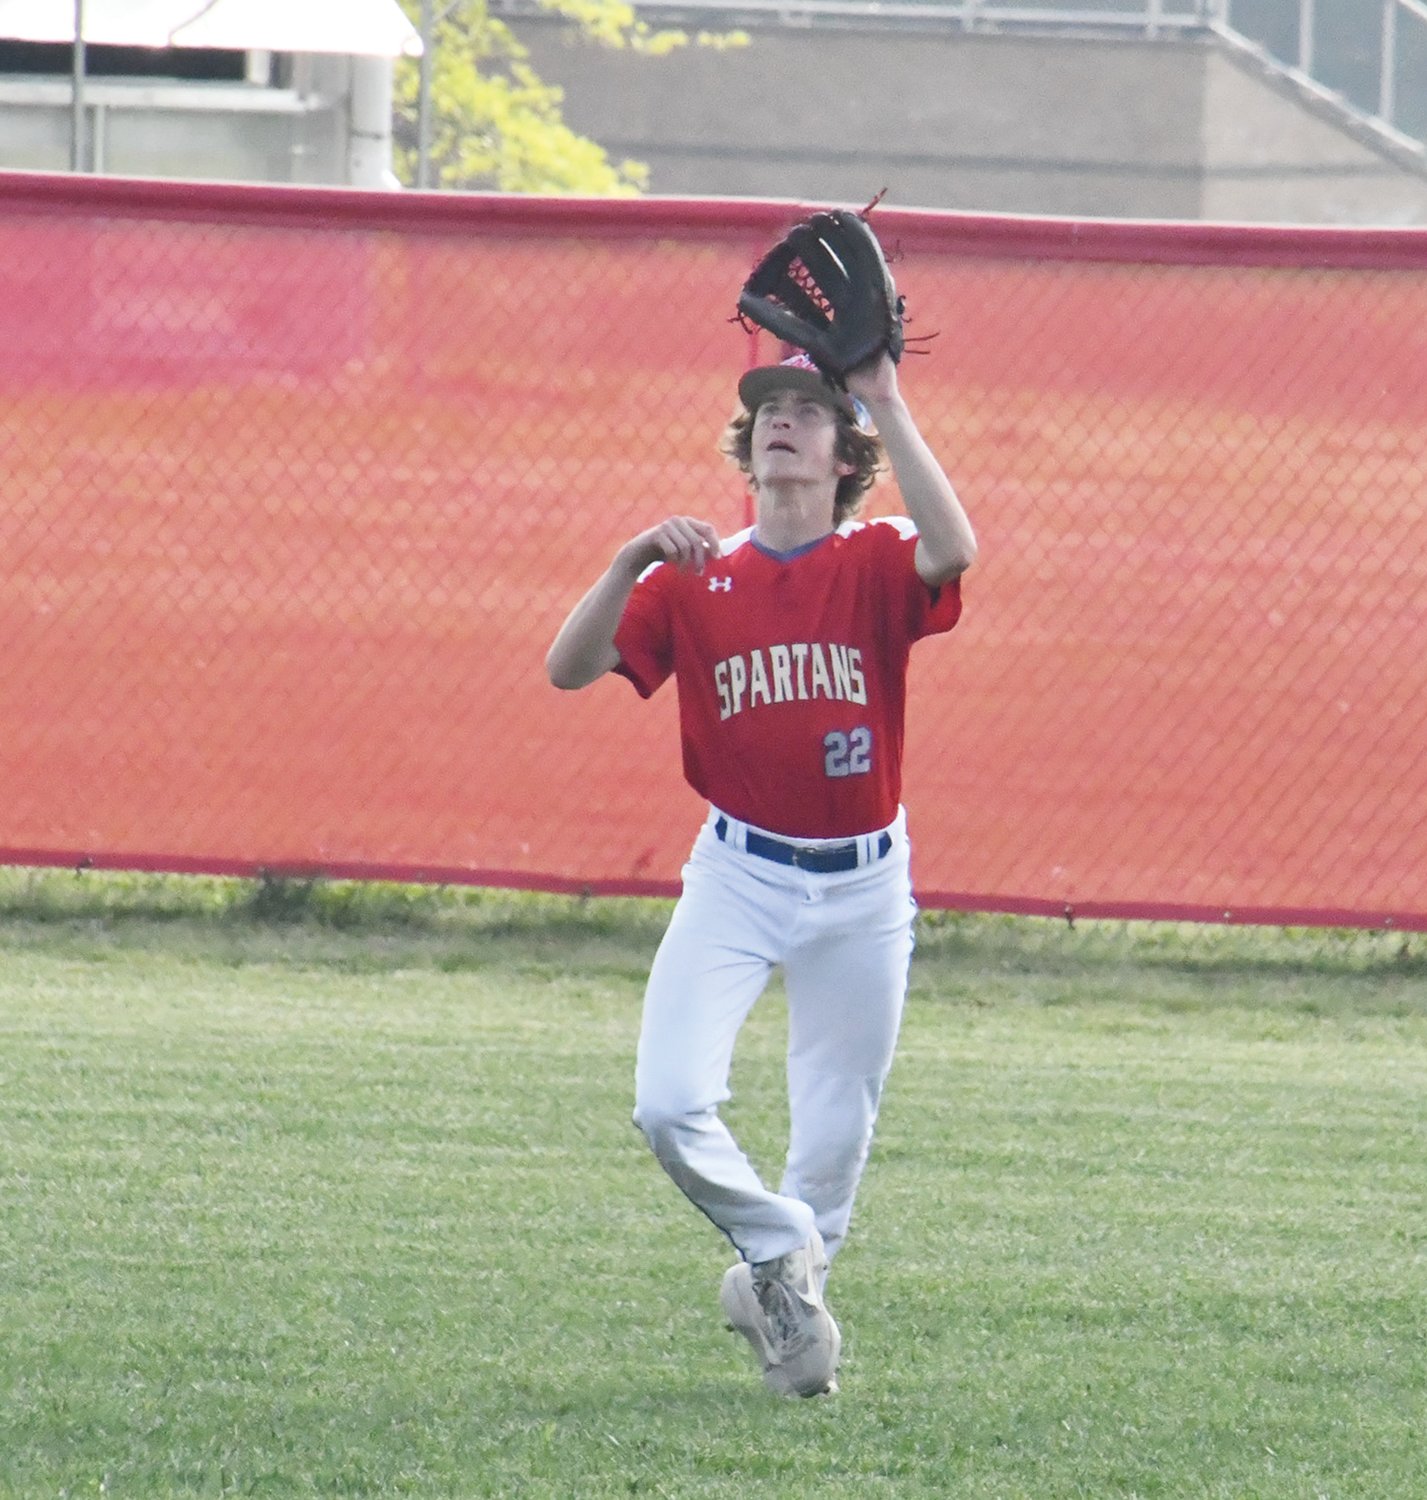 Moberly’s Cade Bohm prepares to make a catch during Tuesday’s North Central Missouri Conference game versus Marshall.